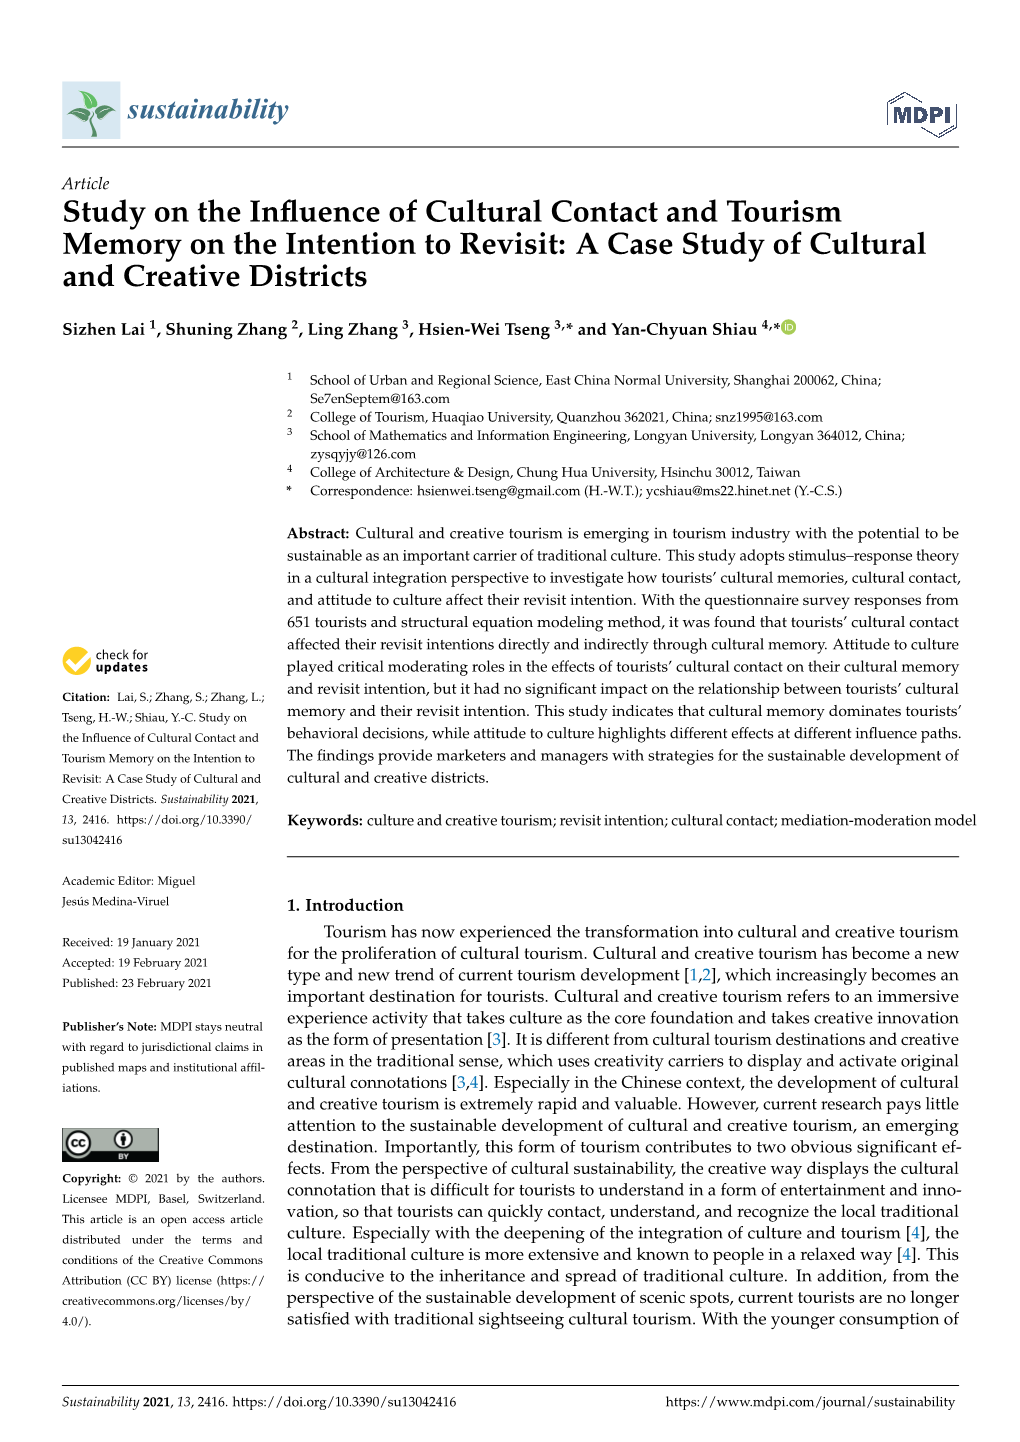 Study on the Influence of Cultural Contact and Tourism Memory On